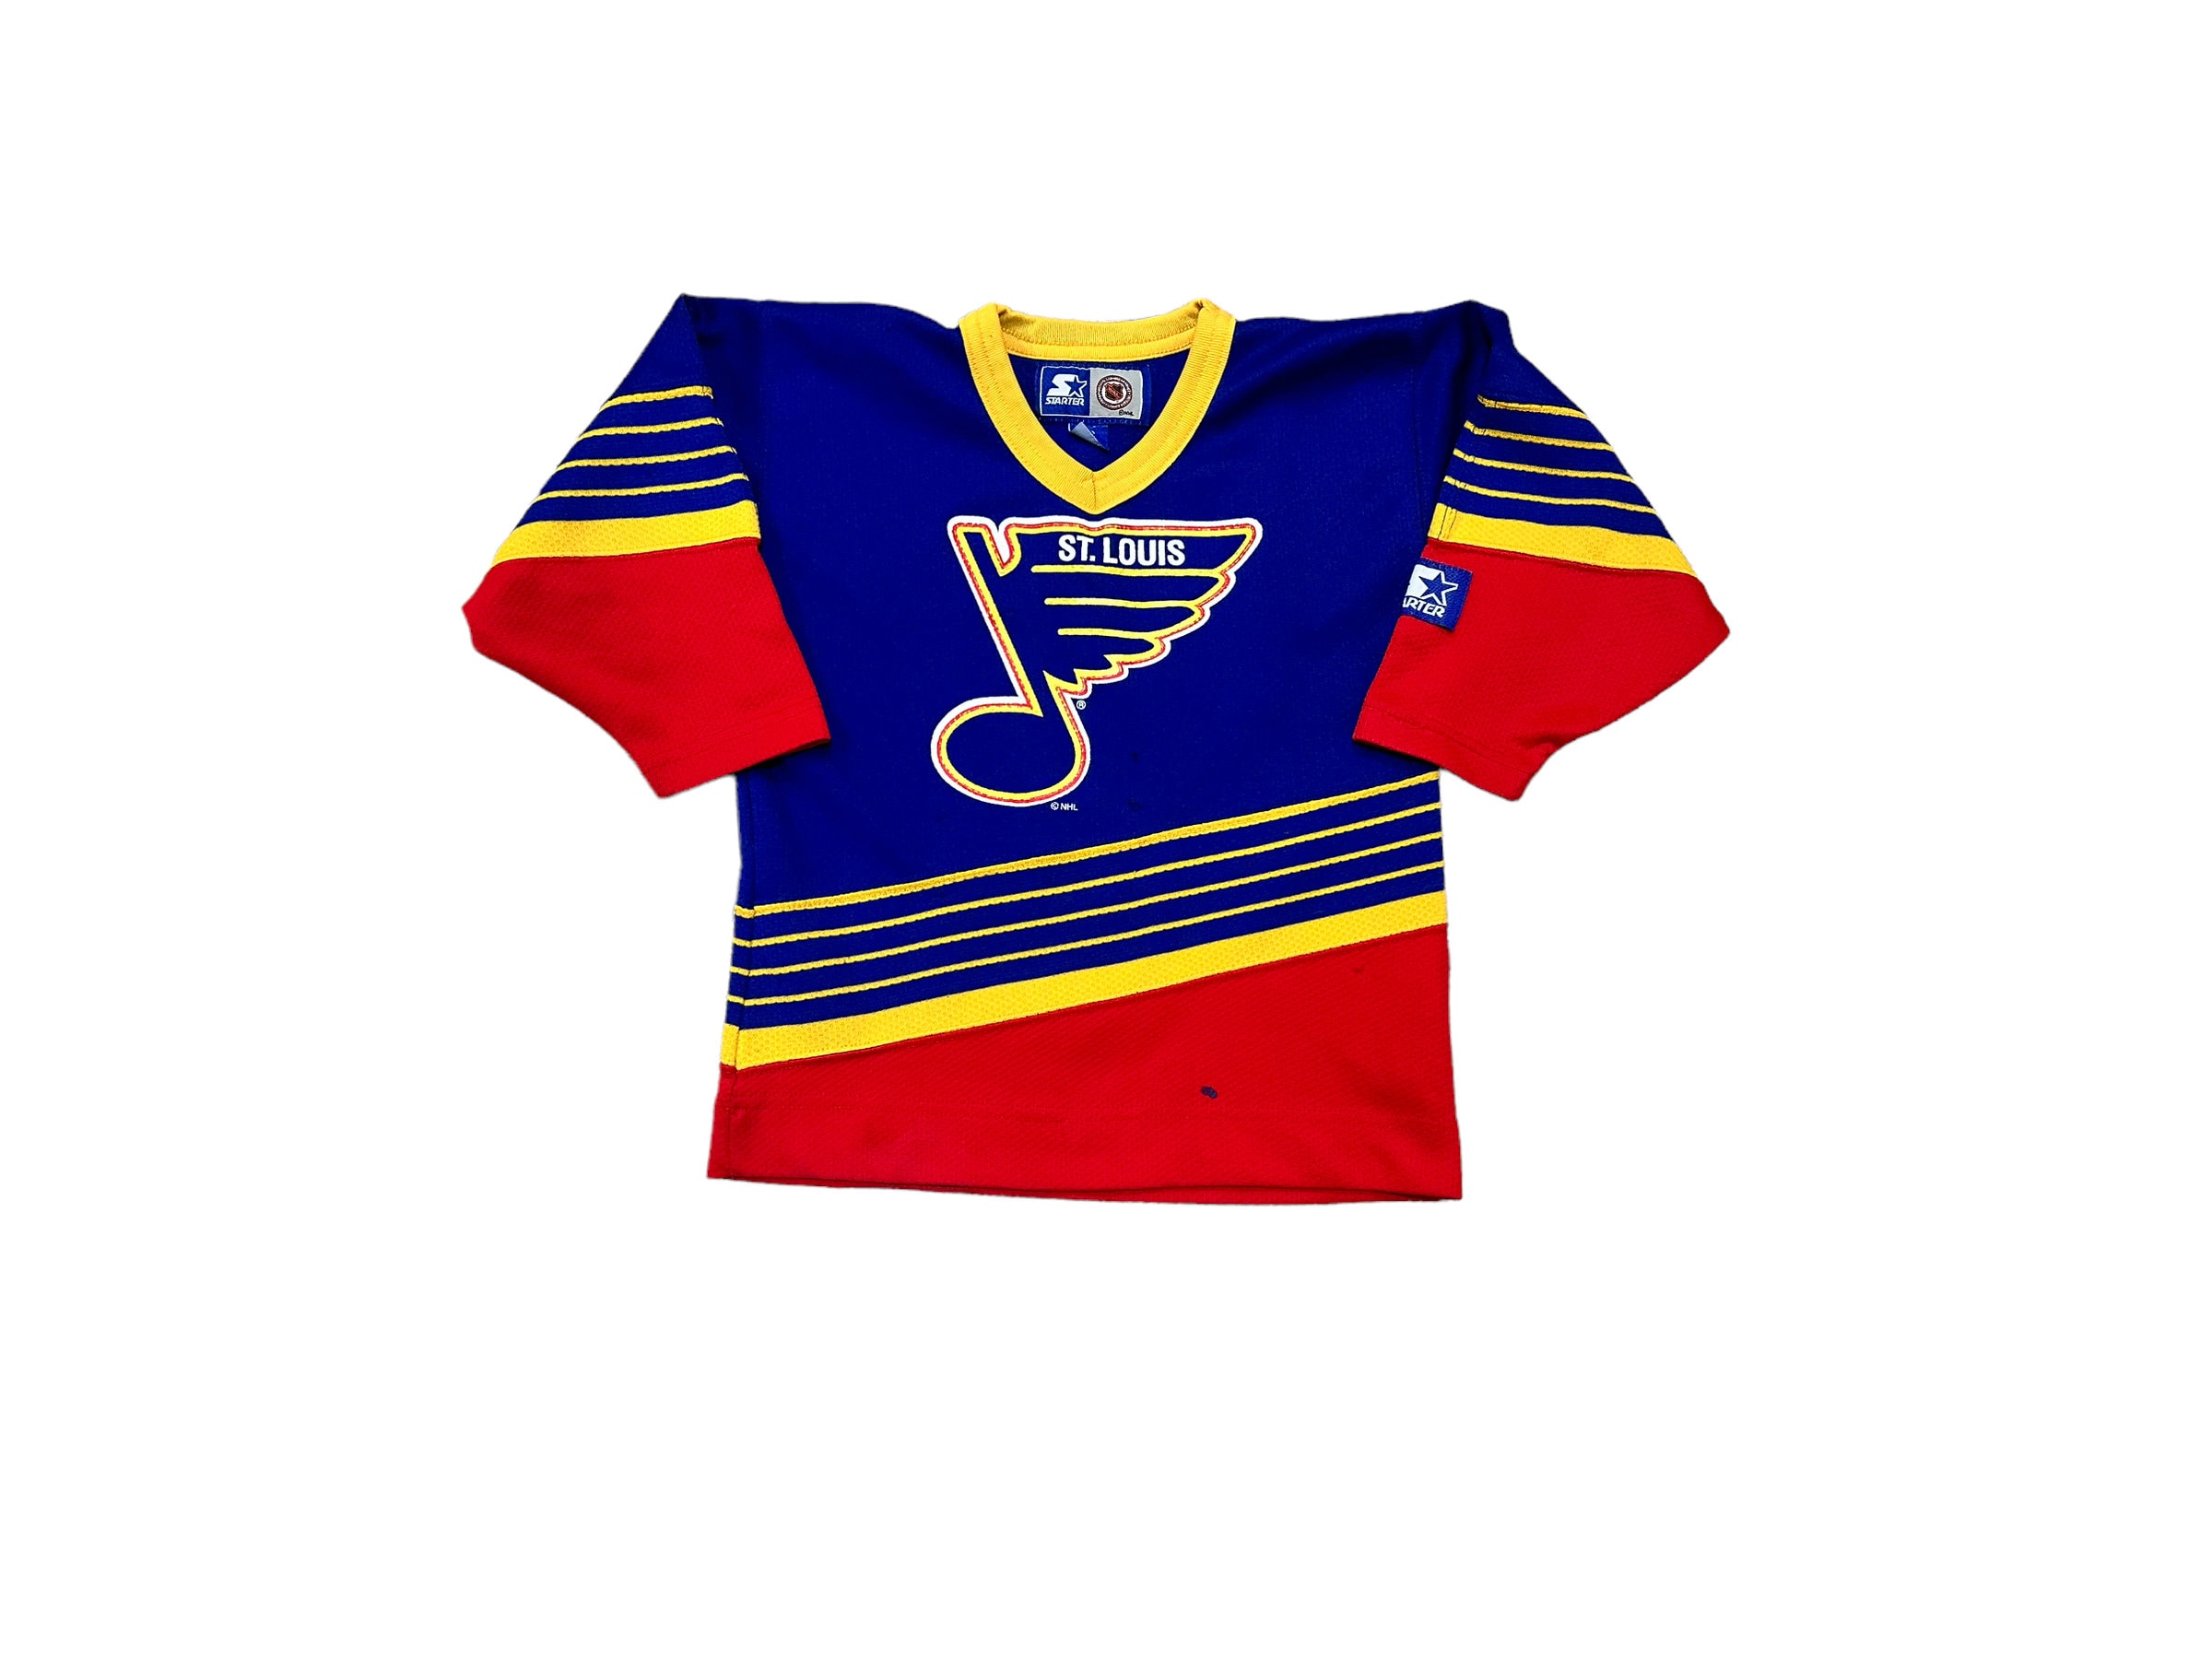 St Louis Blues Youth Blue #1 Design Long Sleeve Tee